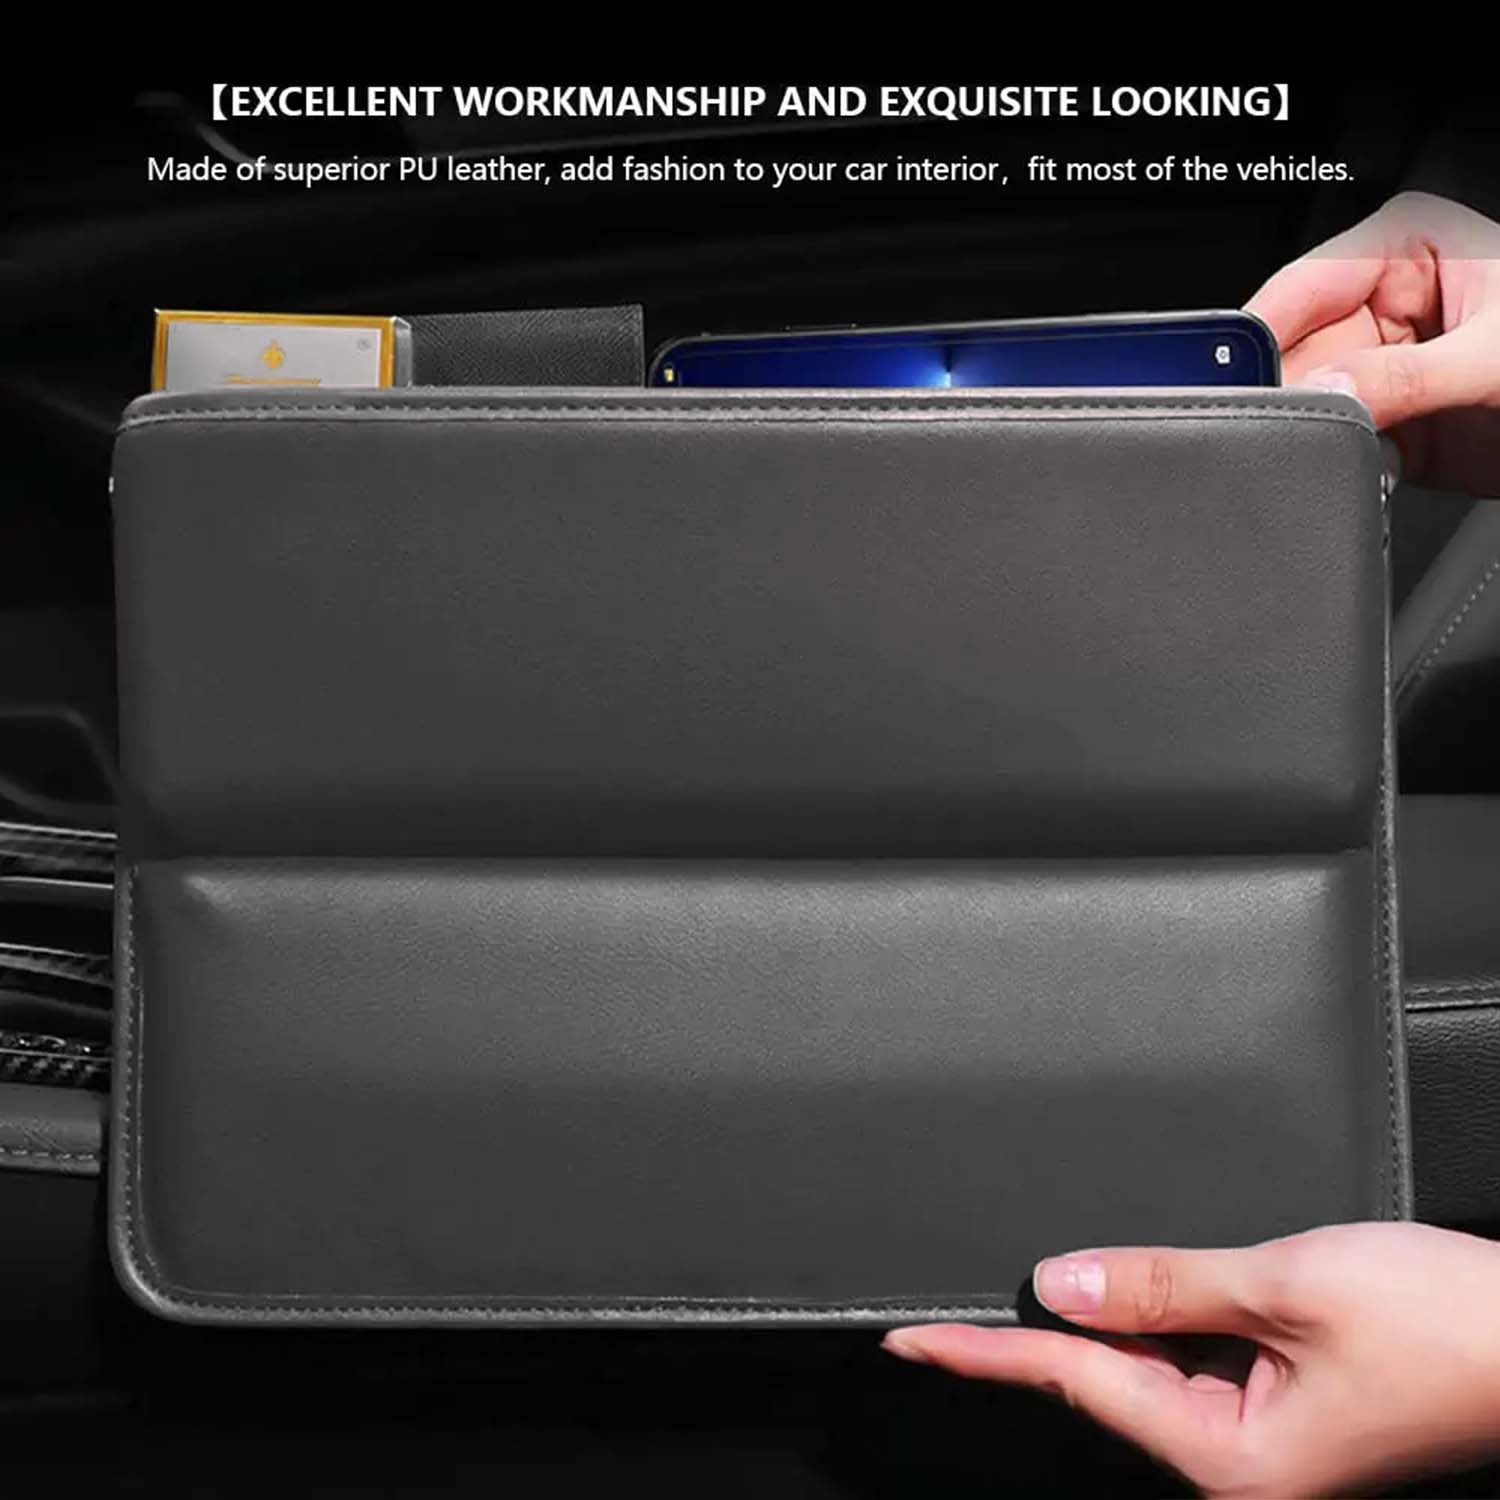 Delicate Leather Car Seat Gap Filler Organizer, Custom Fir For Your Cars, Multifunctional PU Leather Console Side Pocket Organizer for Cellphones, Cards, Wallets, Keys